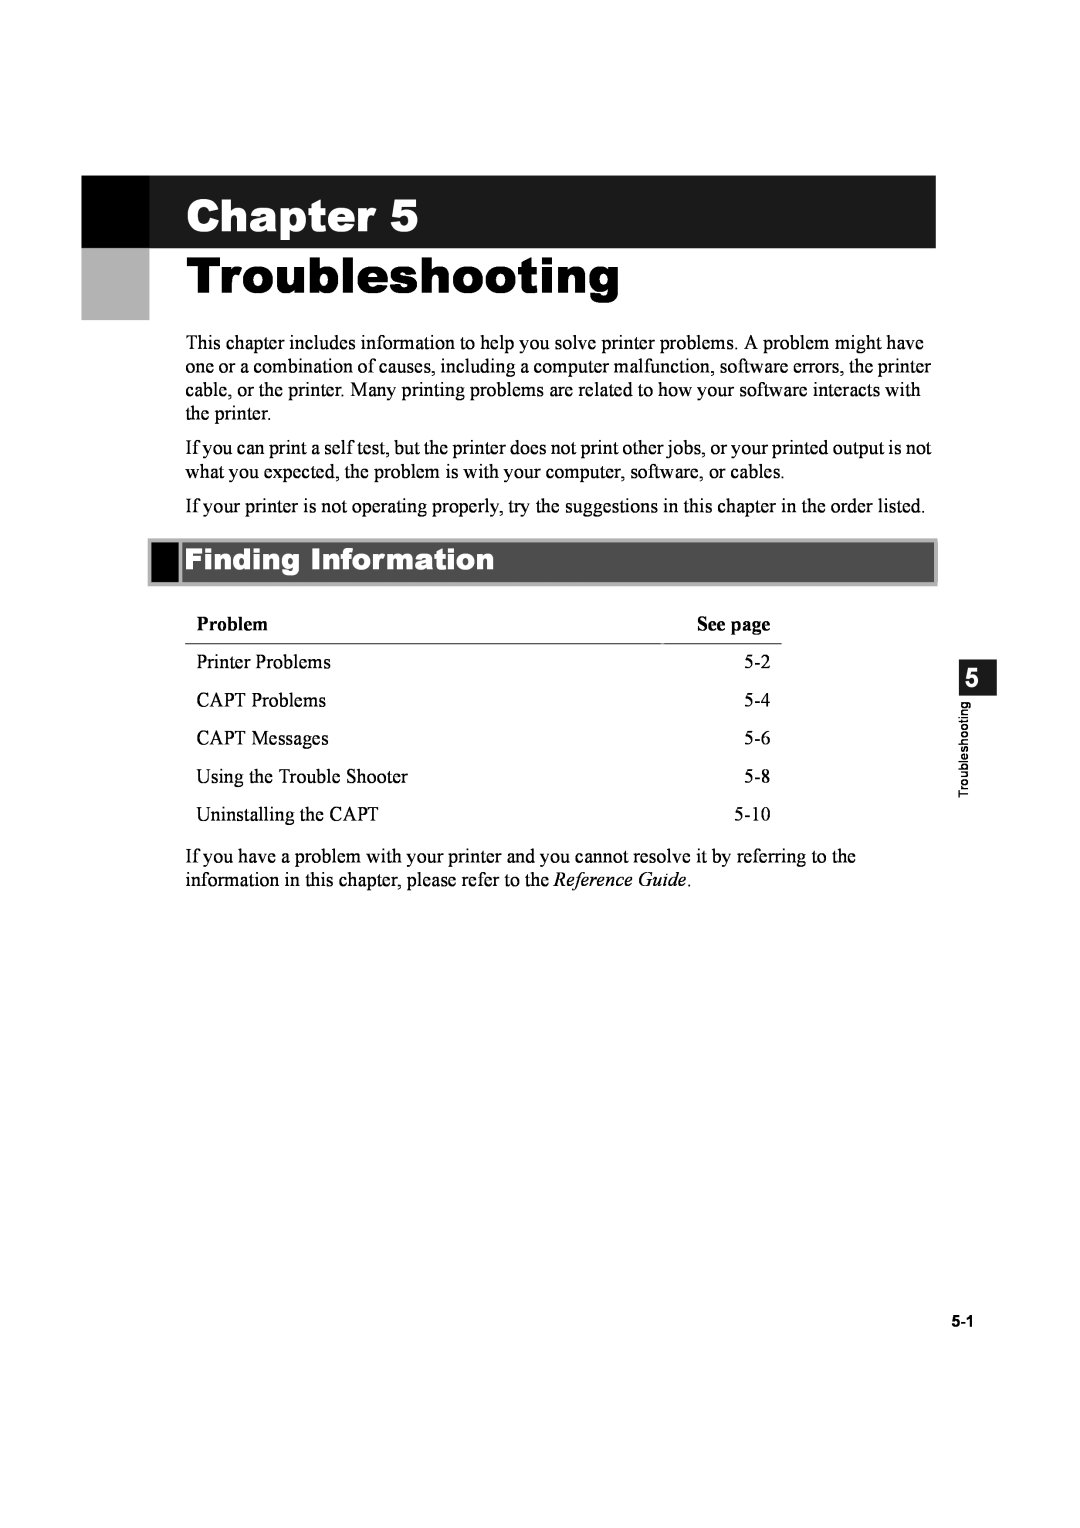 Canon D600 manual Troubleshooting, Finding Information, Problem, See page, Chapter 